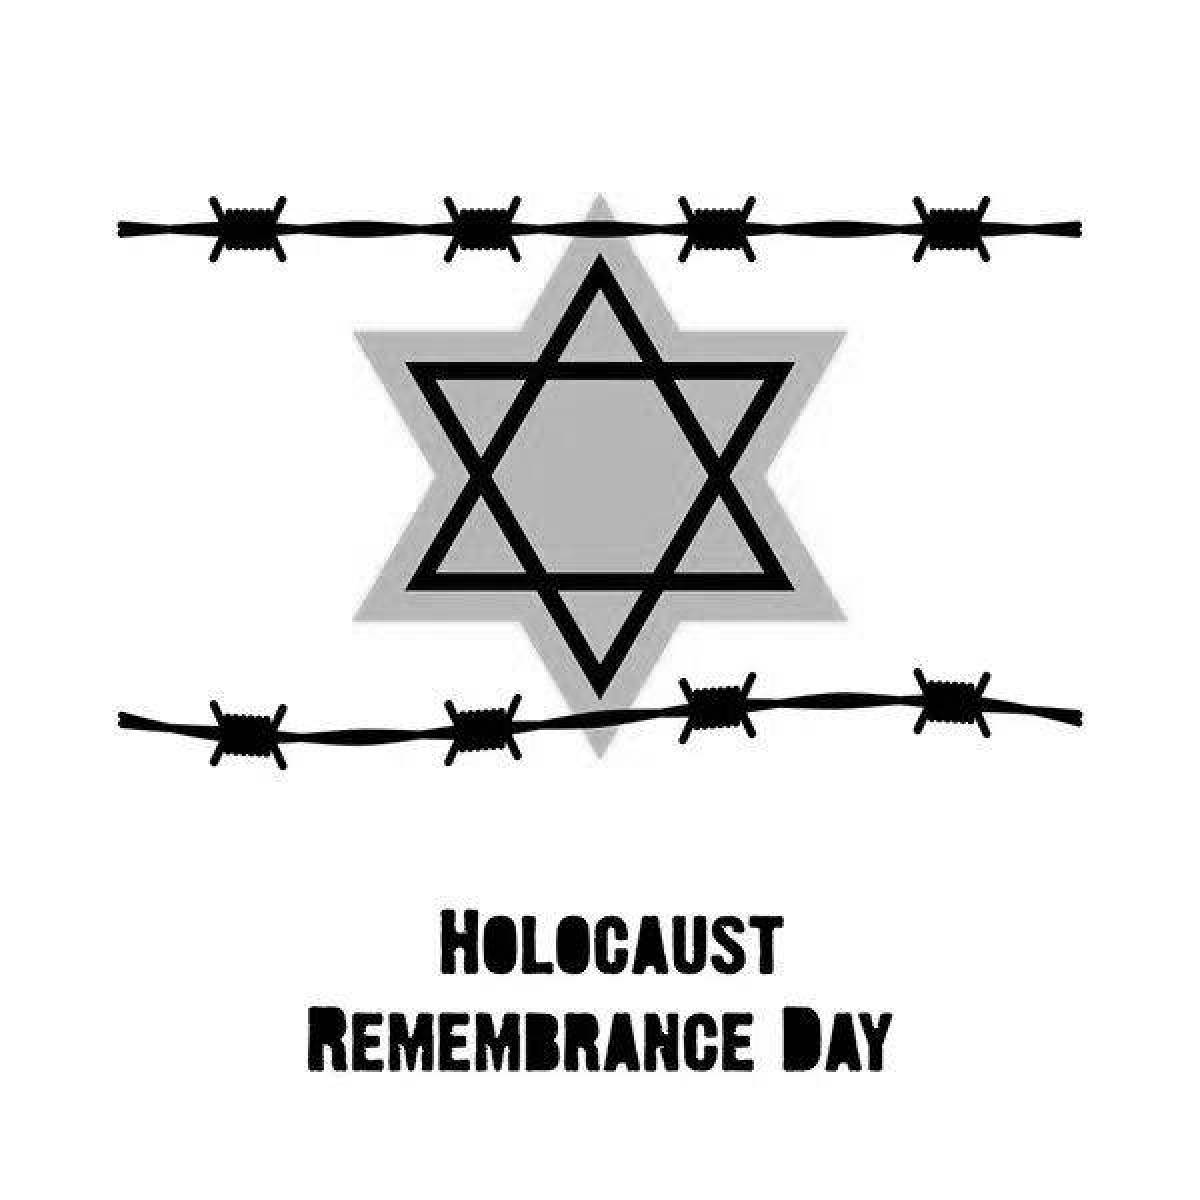 Wonderful coloring flower symbol of the holocaust